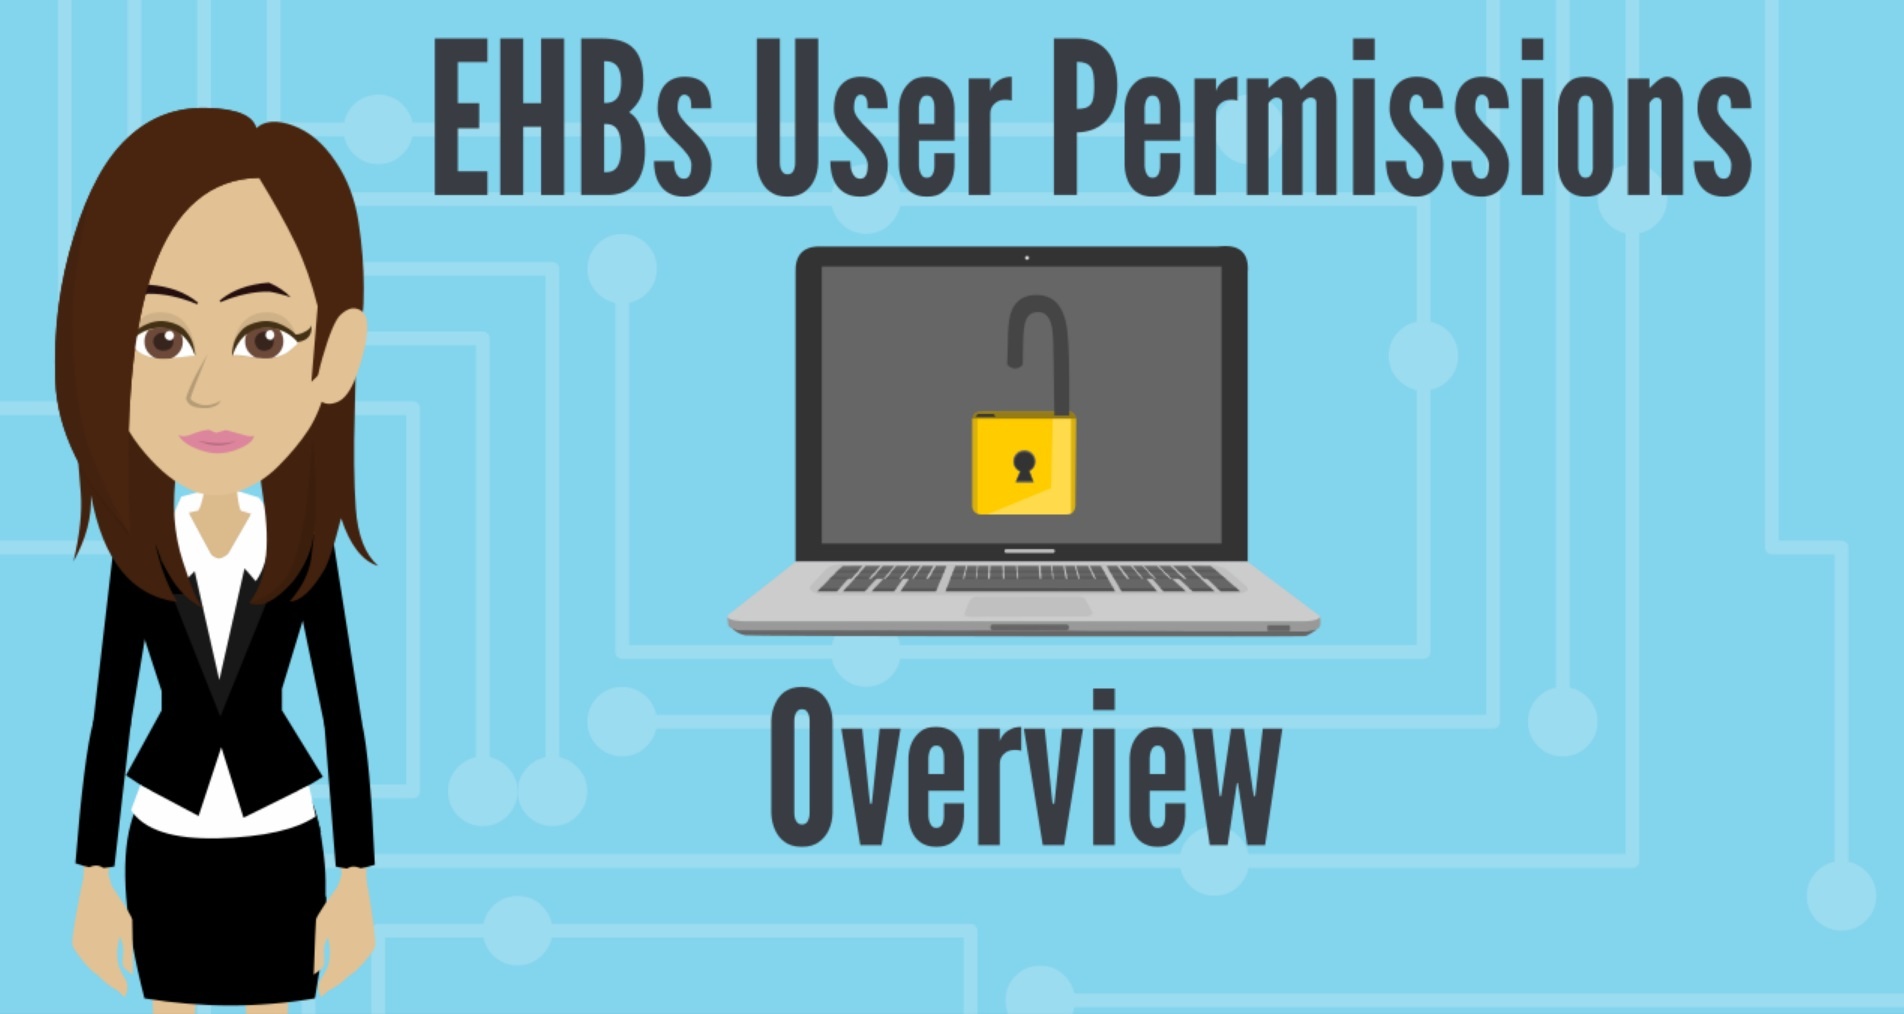 Link to EHBs User Permissions Overview Help Video